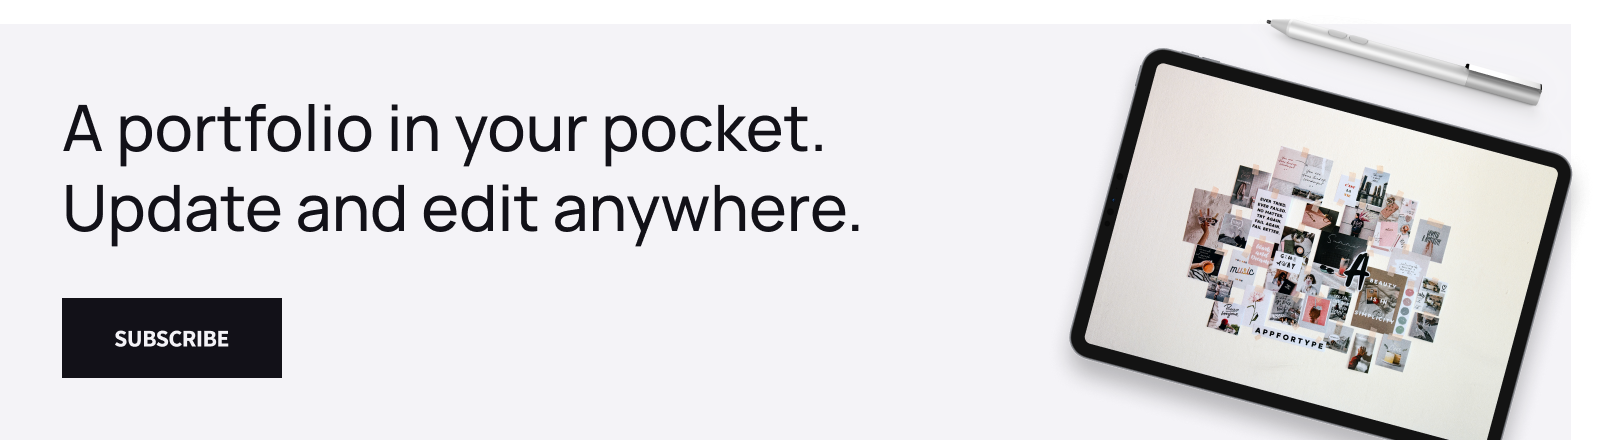 A banner saying "A portfolio in your pocket. Update and edit anywhere." with a subscribe button.